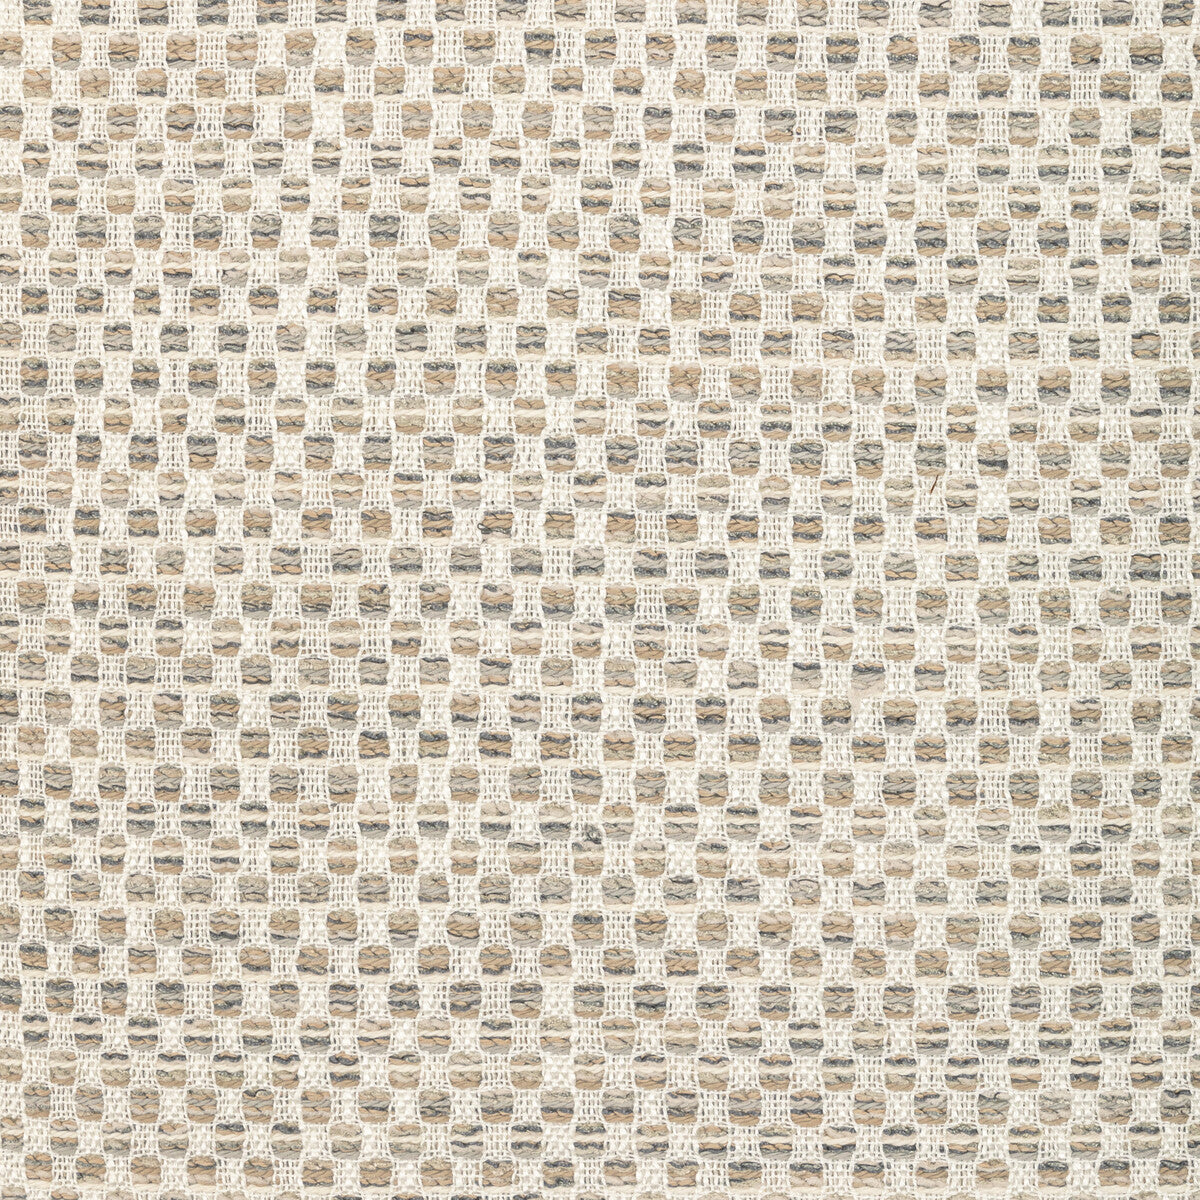 Kravet Design fabric in 36410-1101 color - pattern 36410.1101.0 - by Kravet Design in the Performance Crypton Home collection